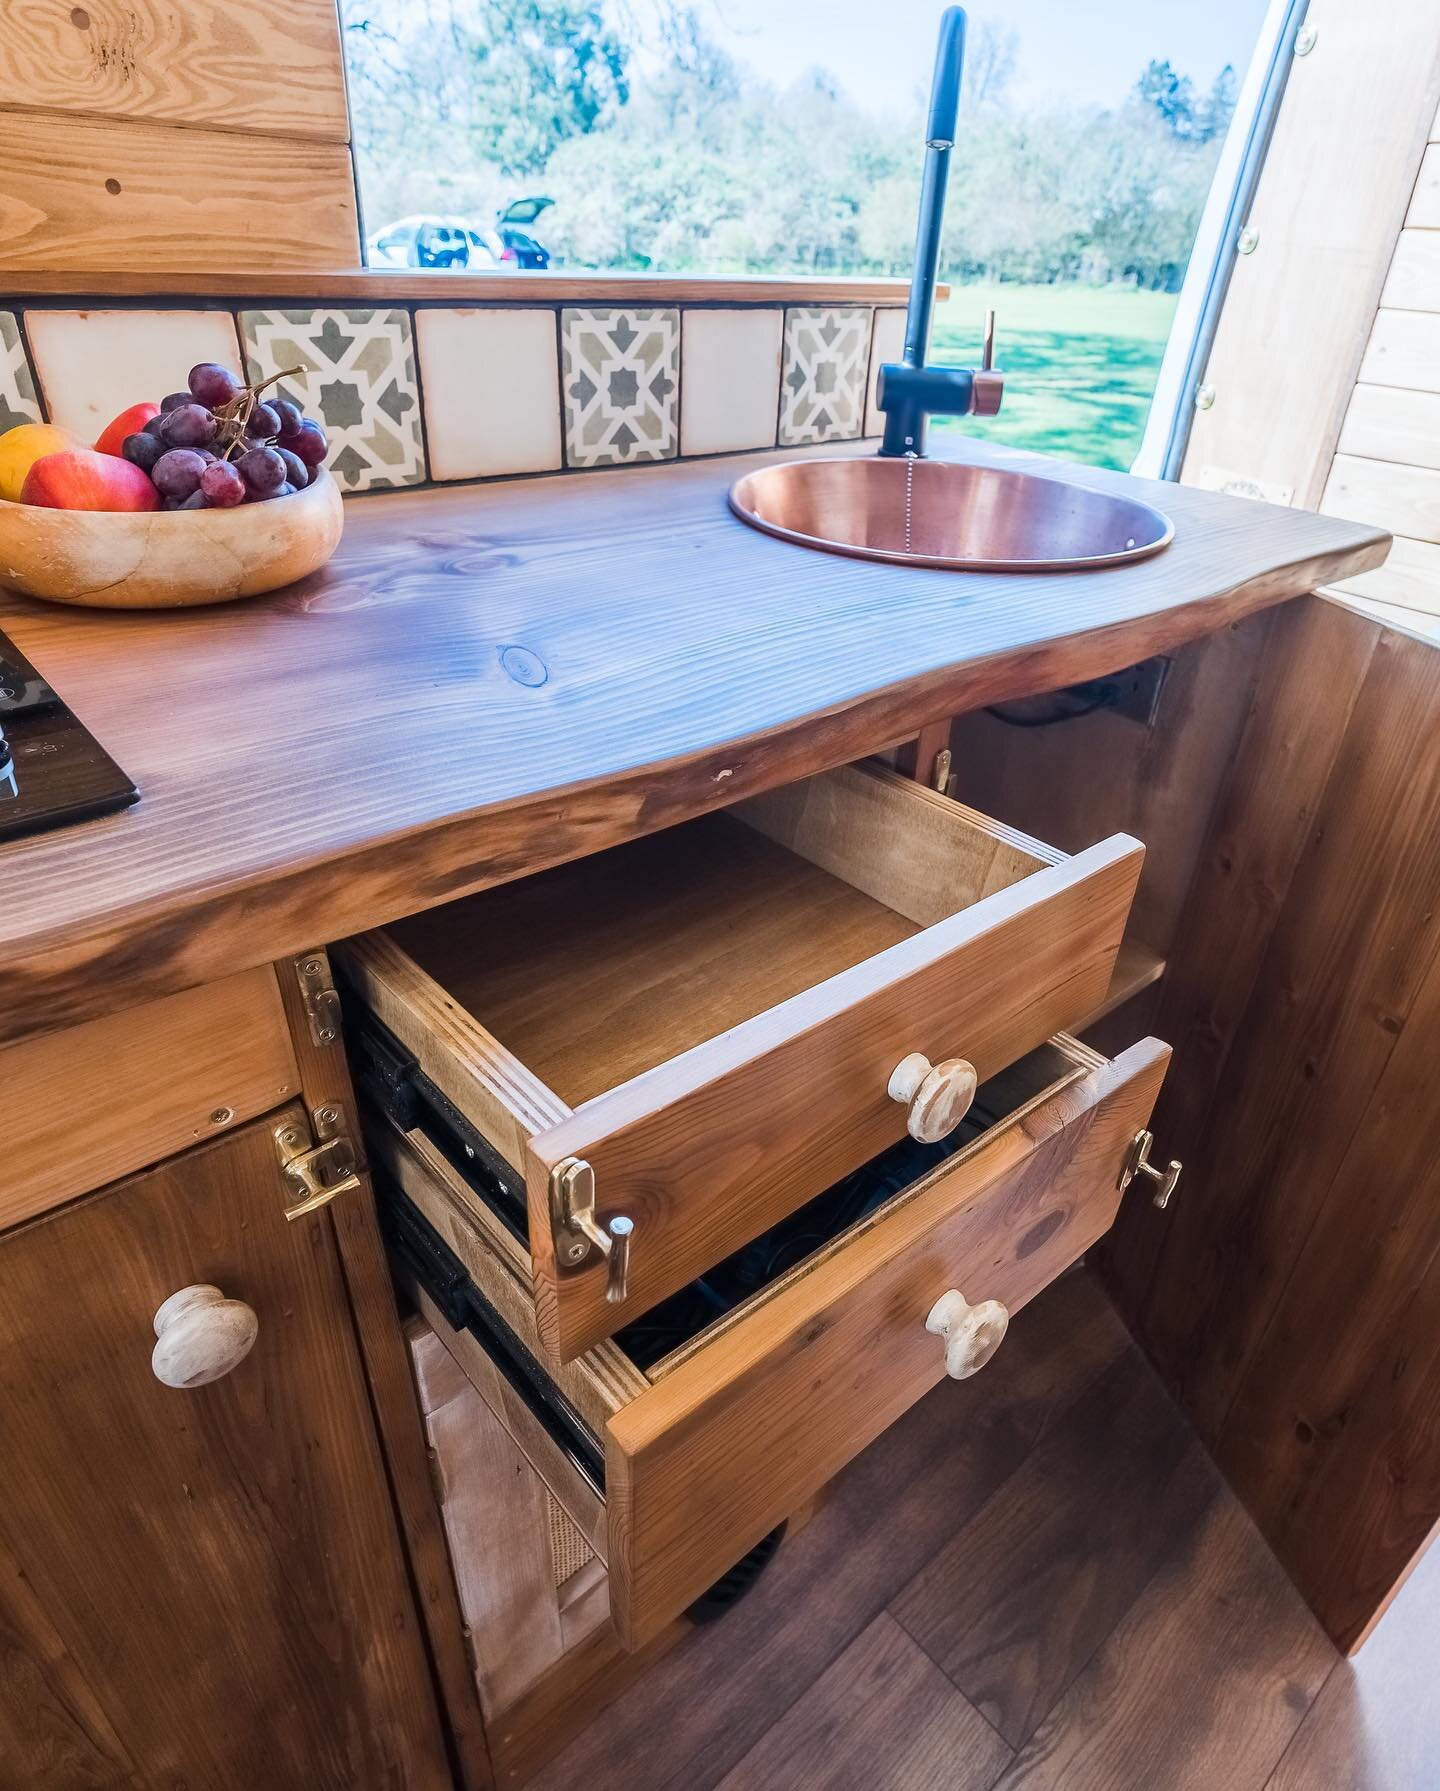 I find metaphors and comparisons helpful as sometimes it&rsquo;s hard to find descriptive words that sum up feelings and stories.

See this last campervan kitchen we built at @handkrafted_campers well it&rsquo;s full of reclaimed, restored, recycled,